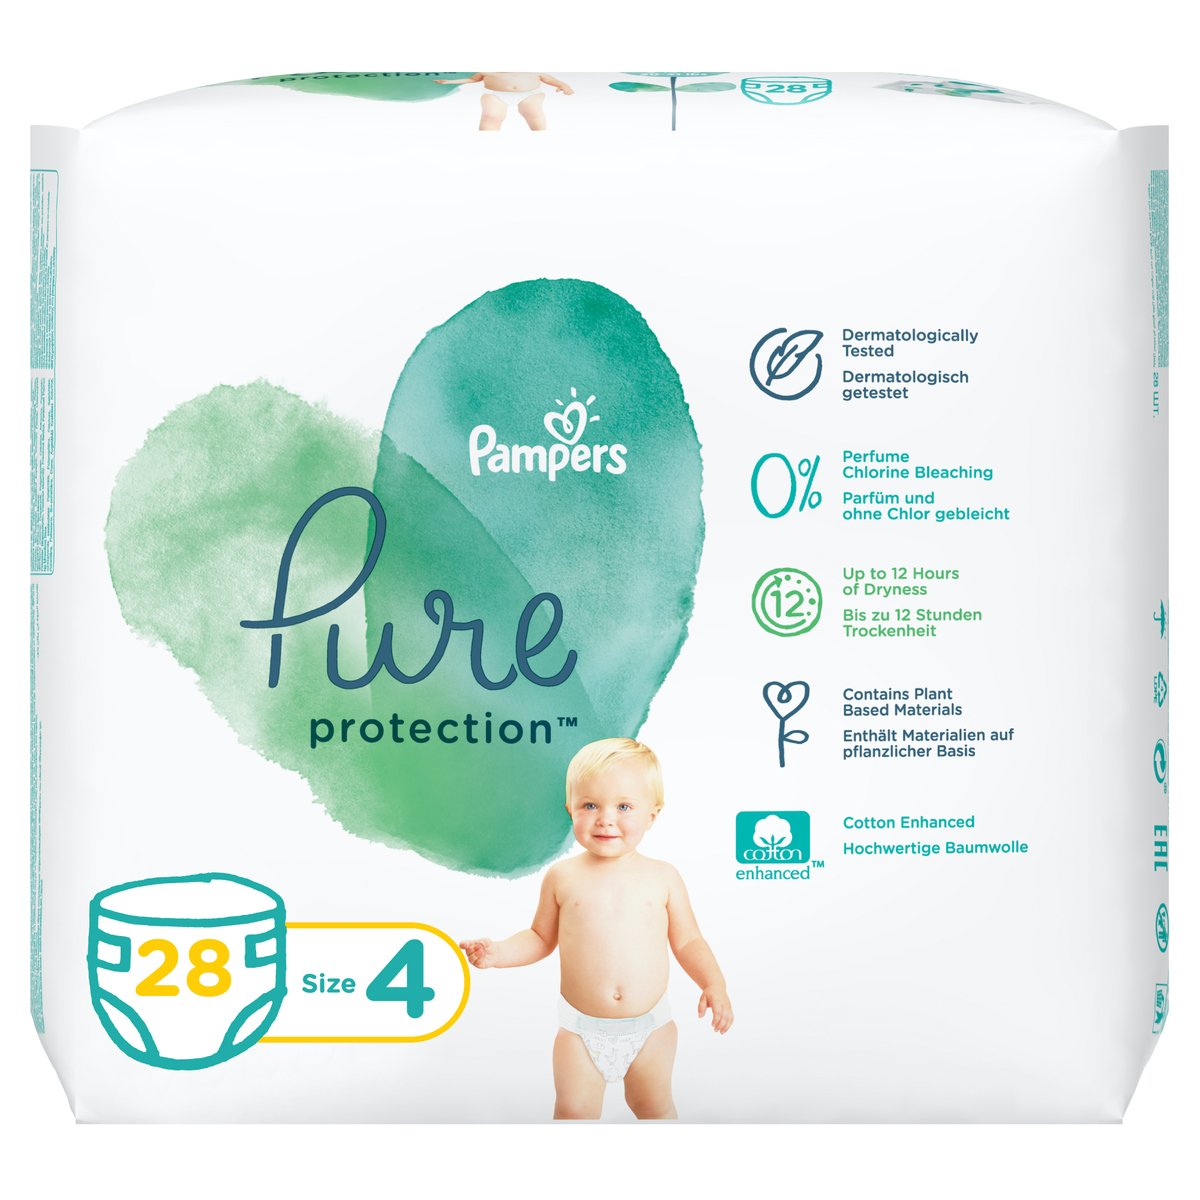 Pampers Pure Protection size 1, from 2-5 kg diaper panties 35 pieces